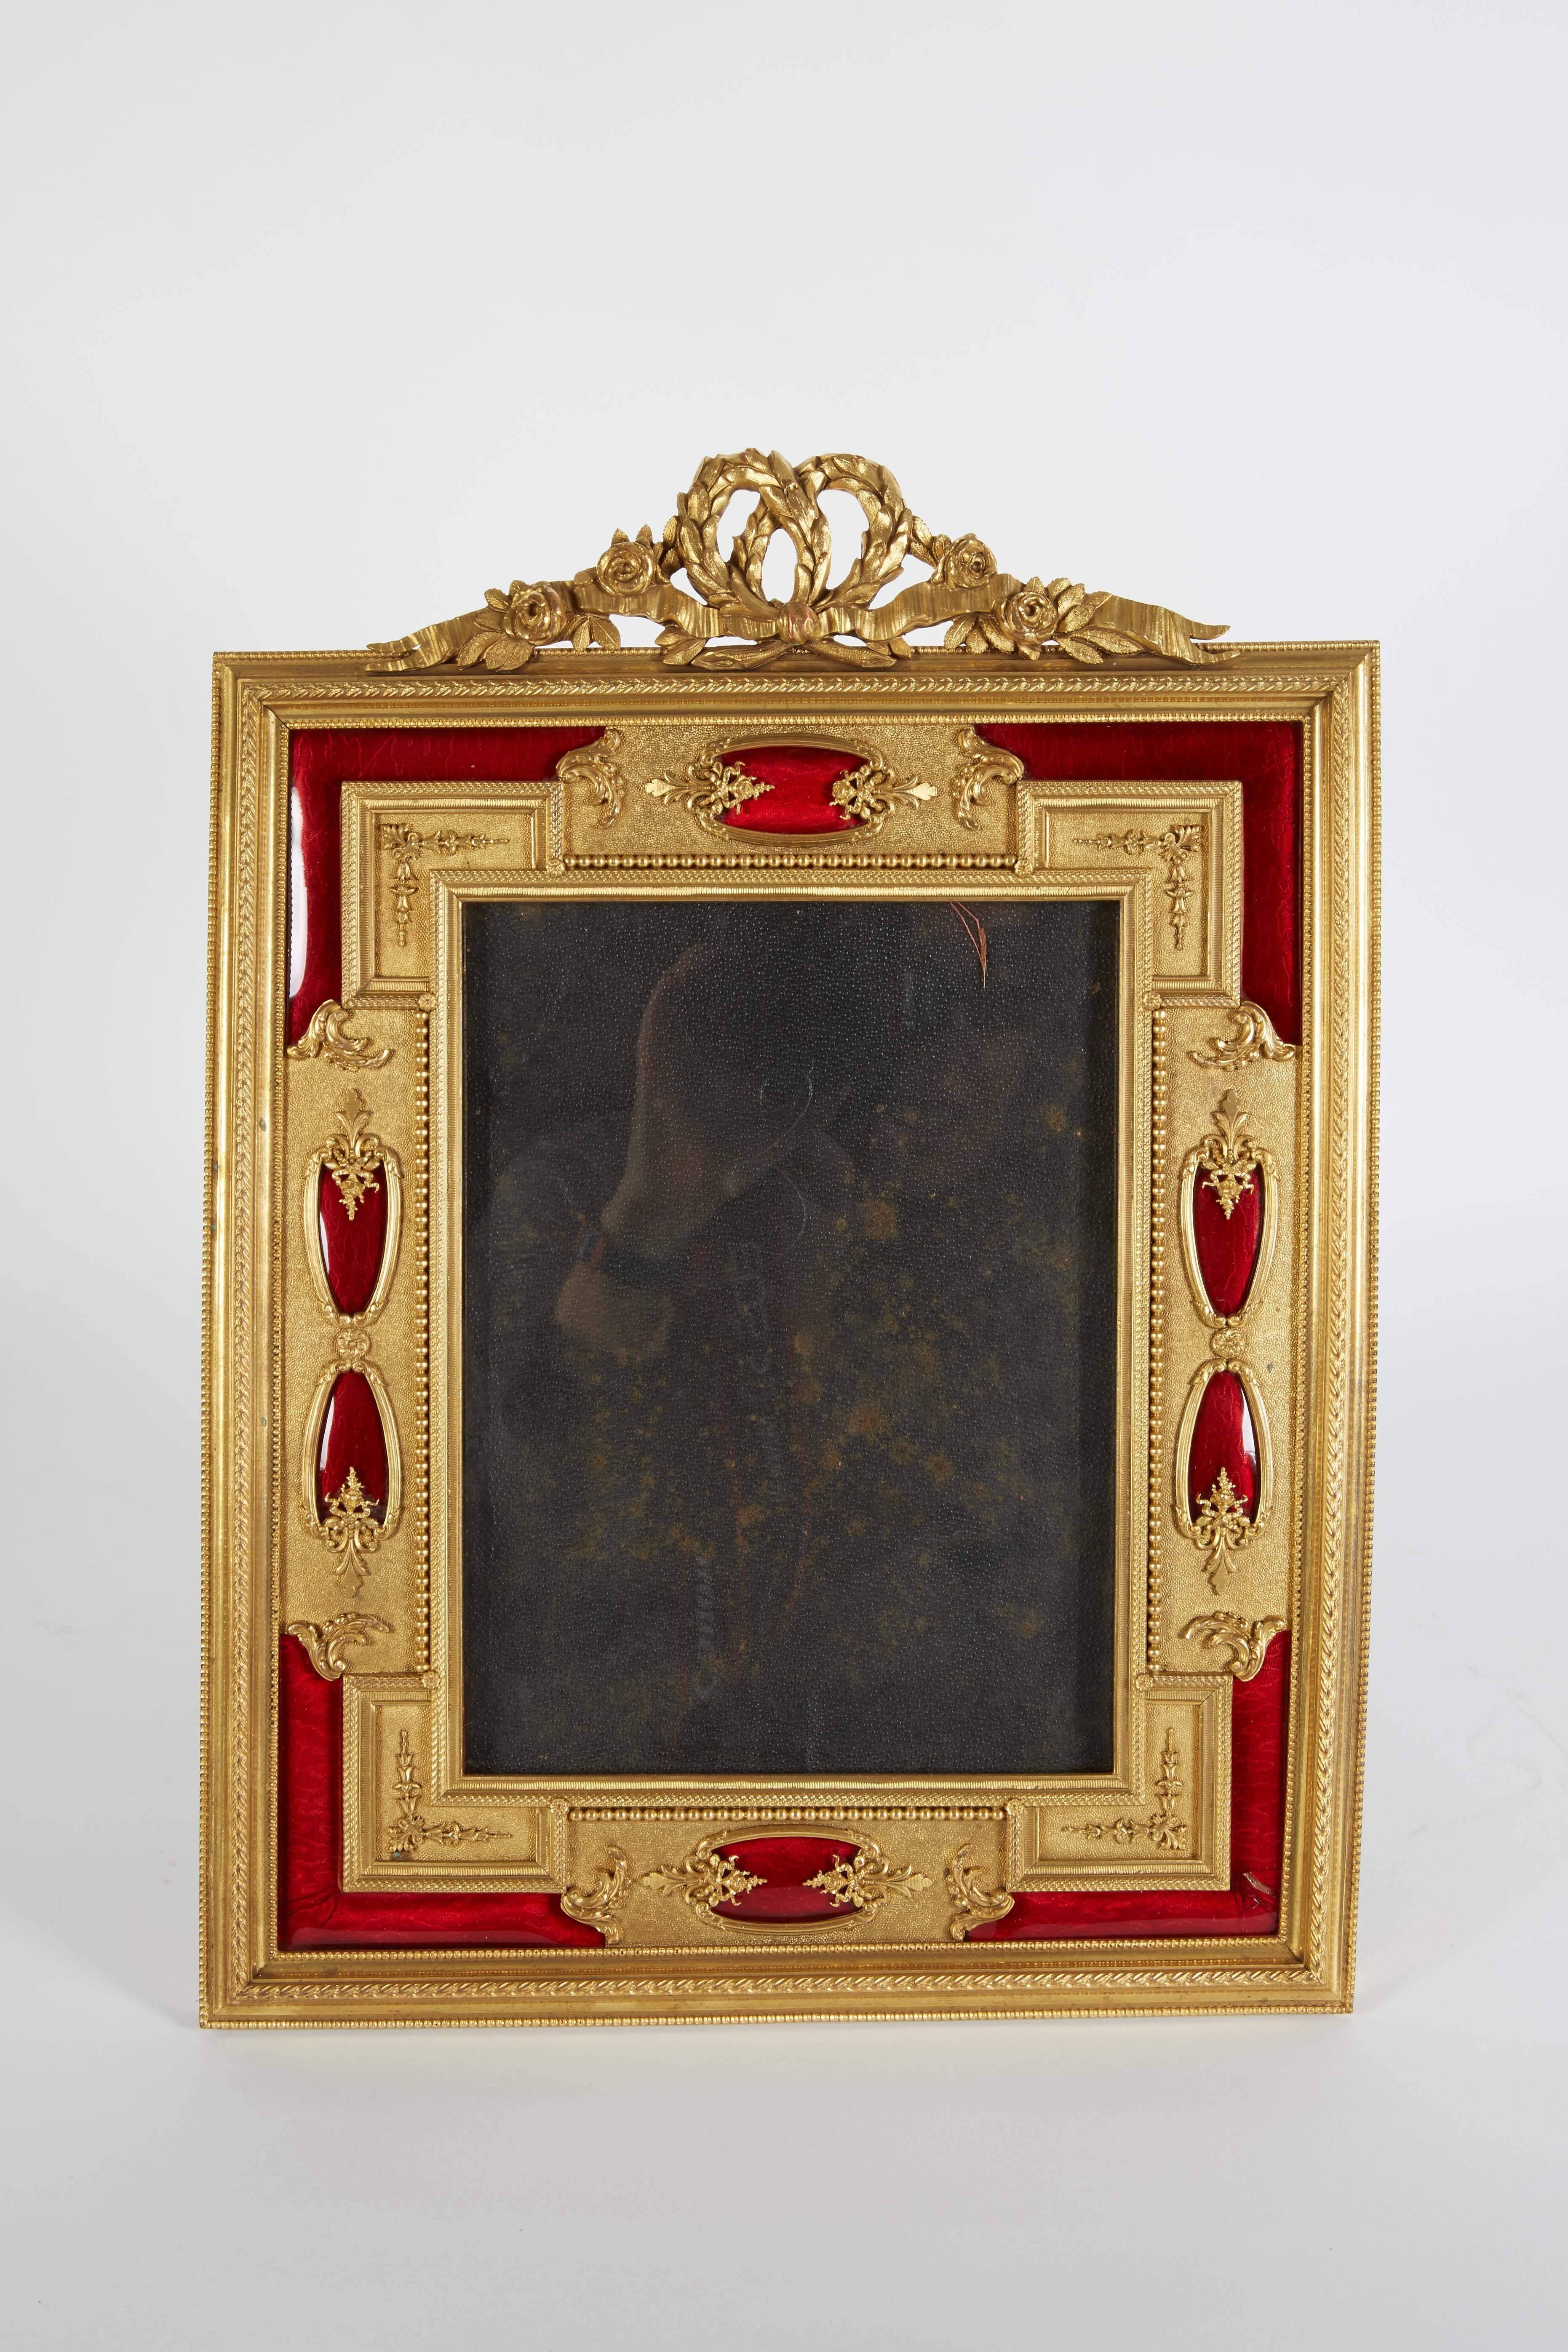 A French gilt bronze ormolu and red Guilloche enamel picture photo frame, 19th century.

Frame size: 16 x 11.5 inches.
Photo size: 9 x 6.5 inches.